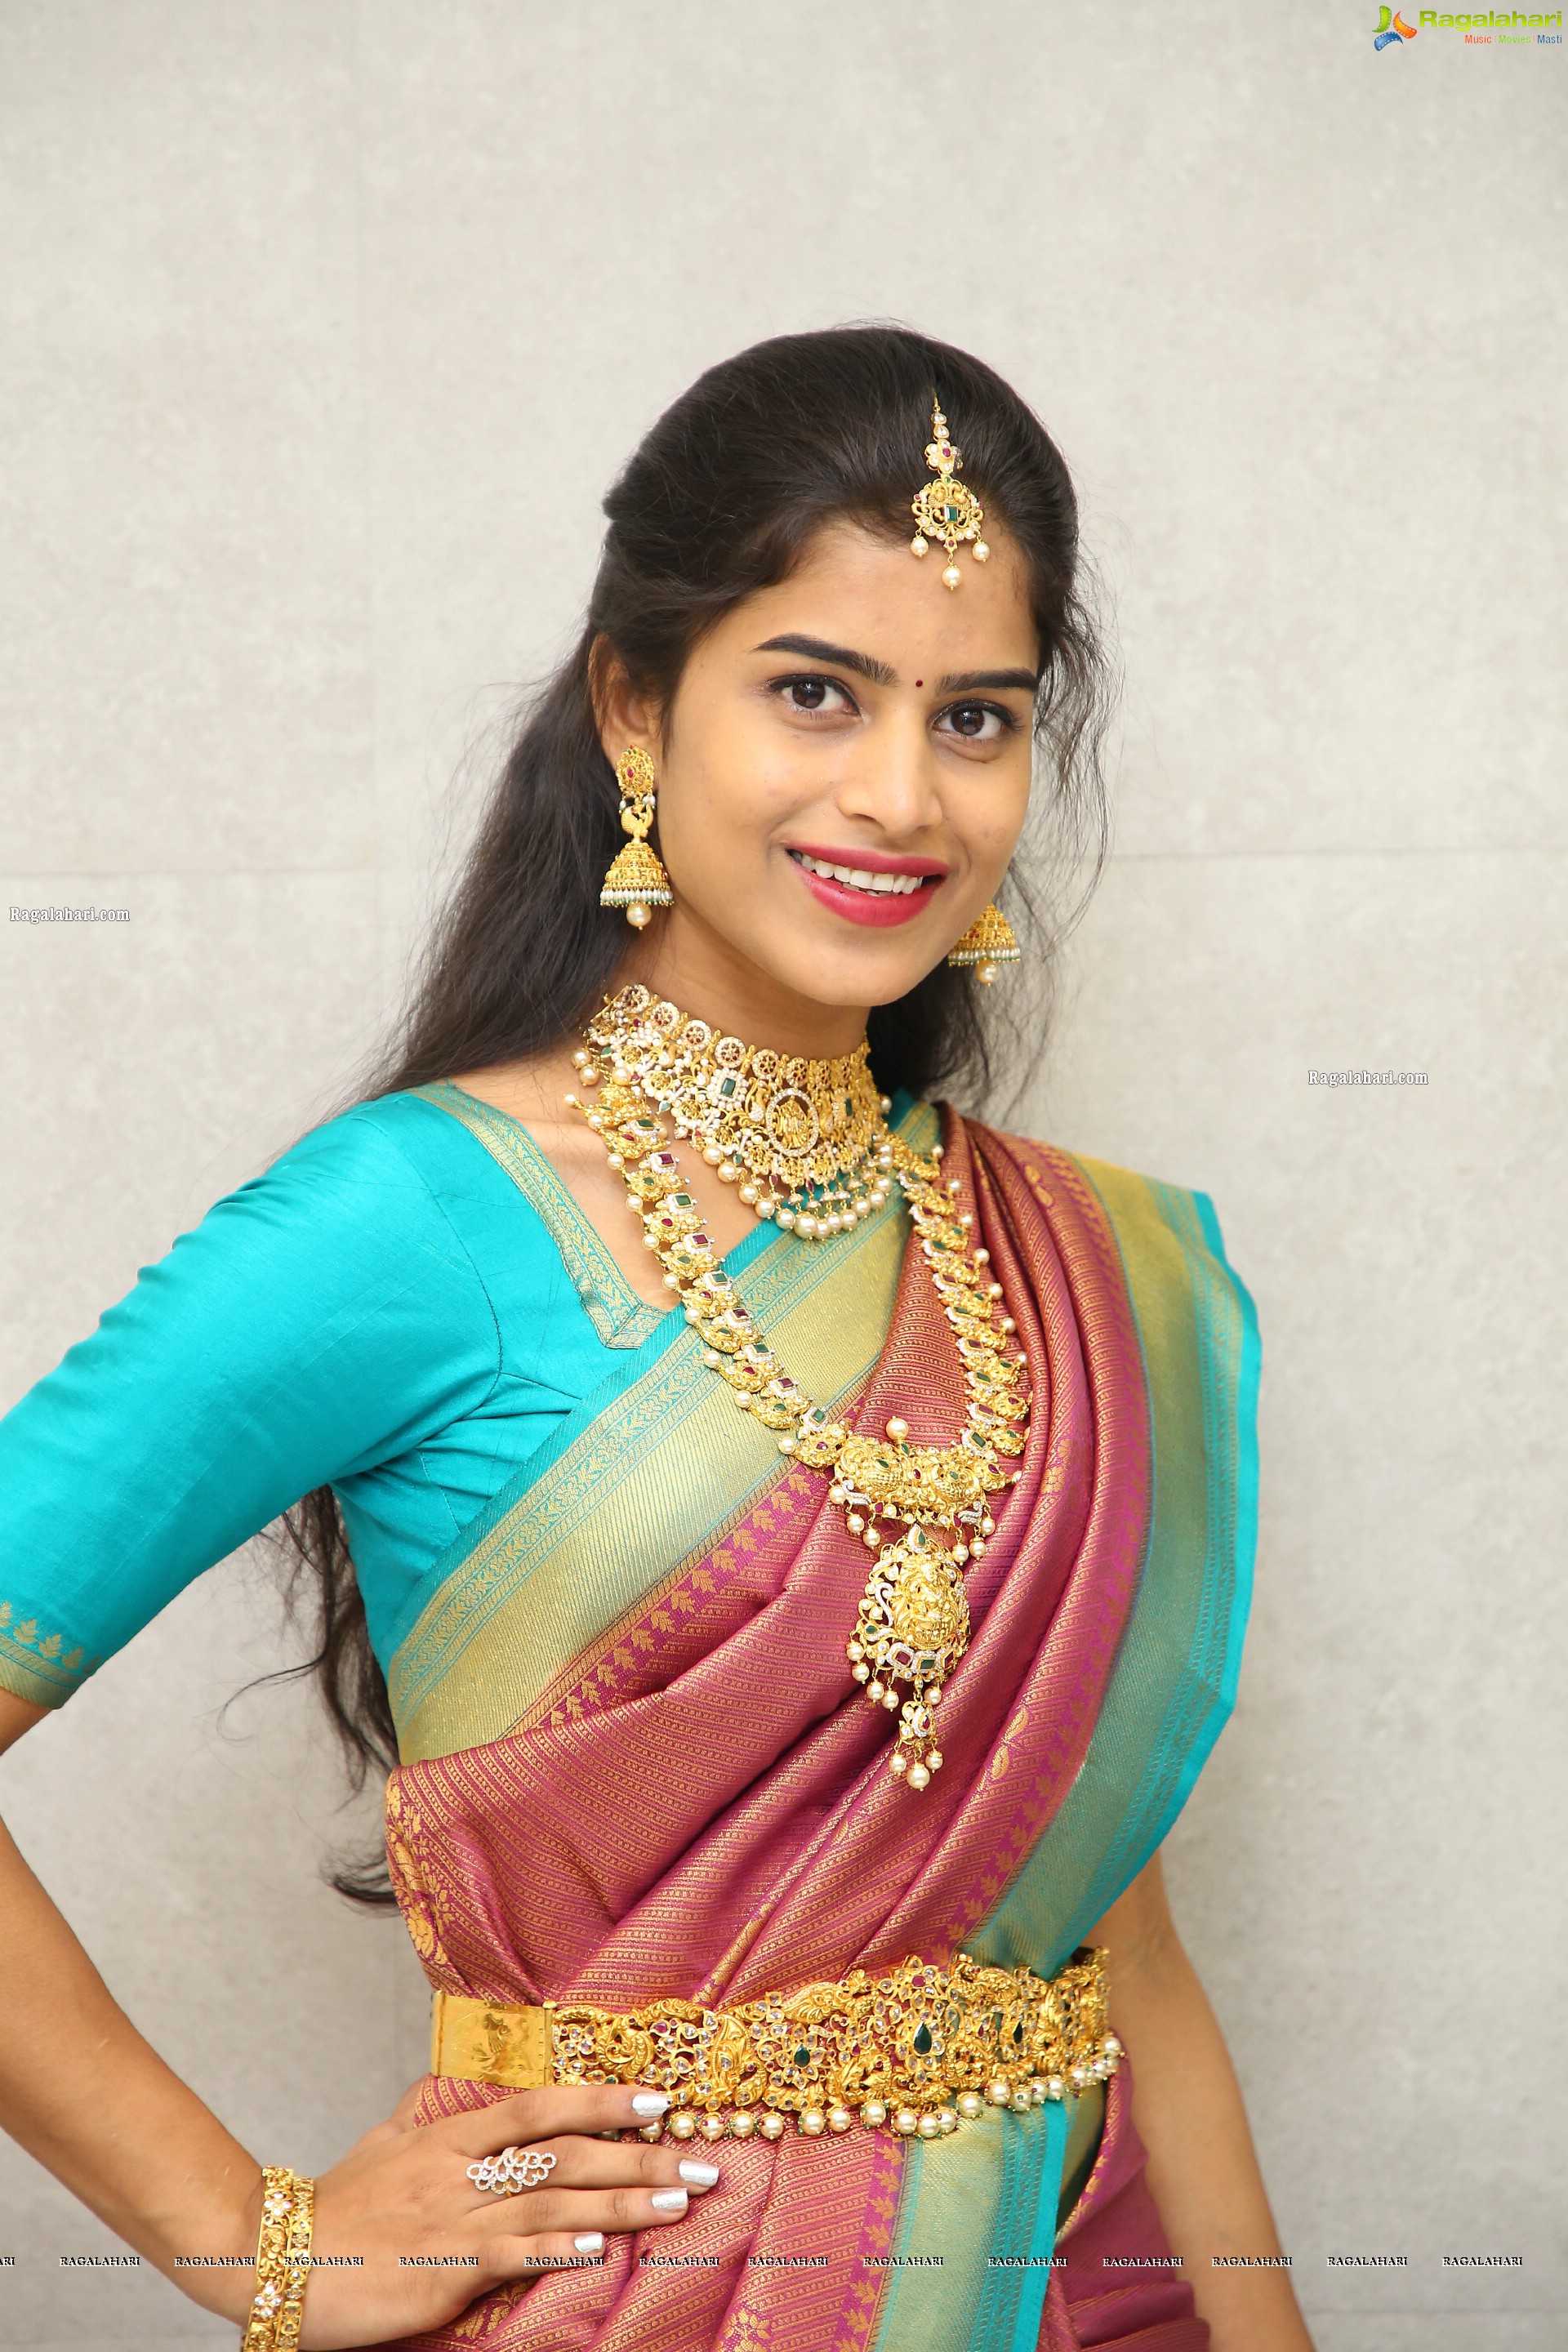 Srilekha Poses With Traditional Jewellery, HD photo Gallery